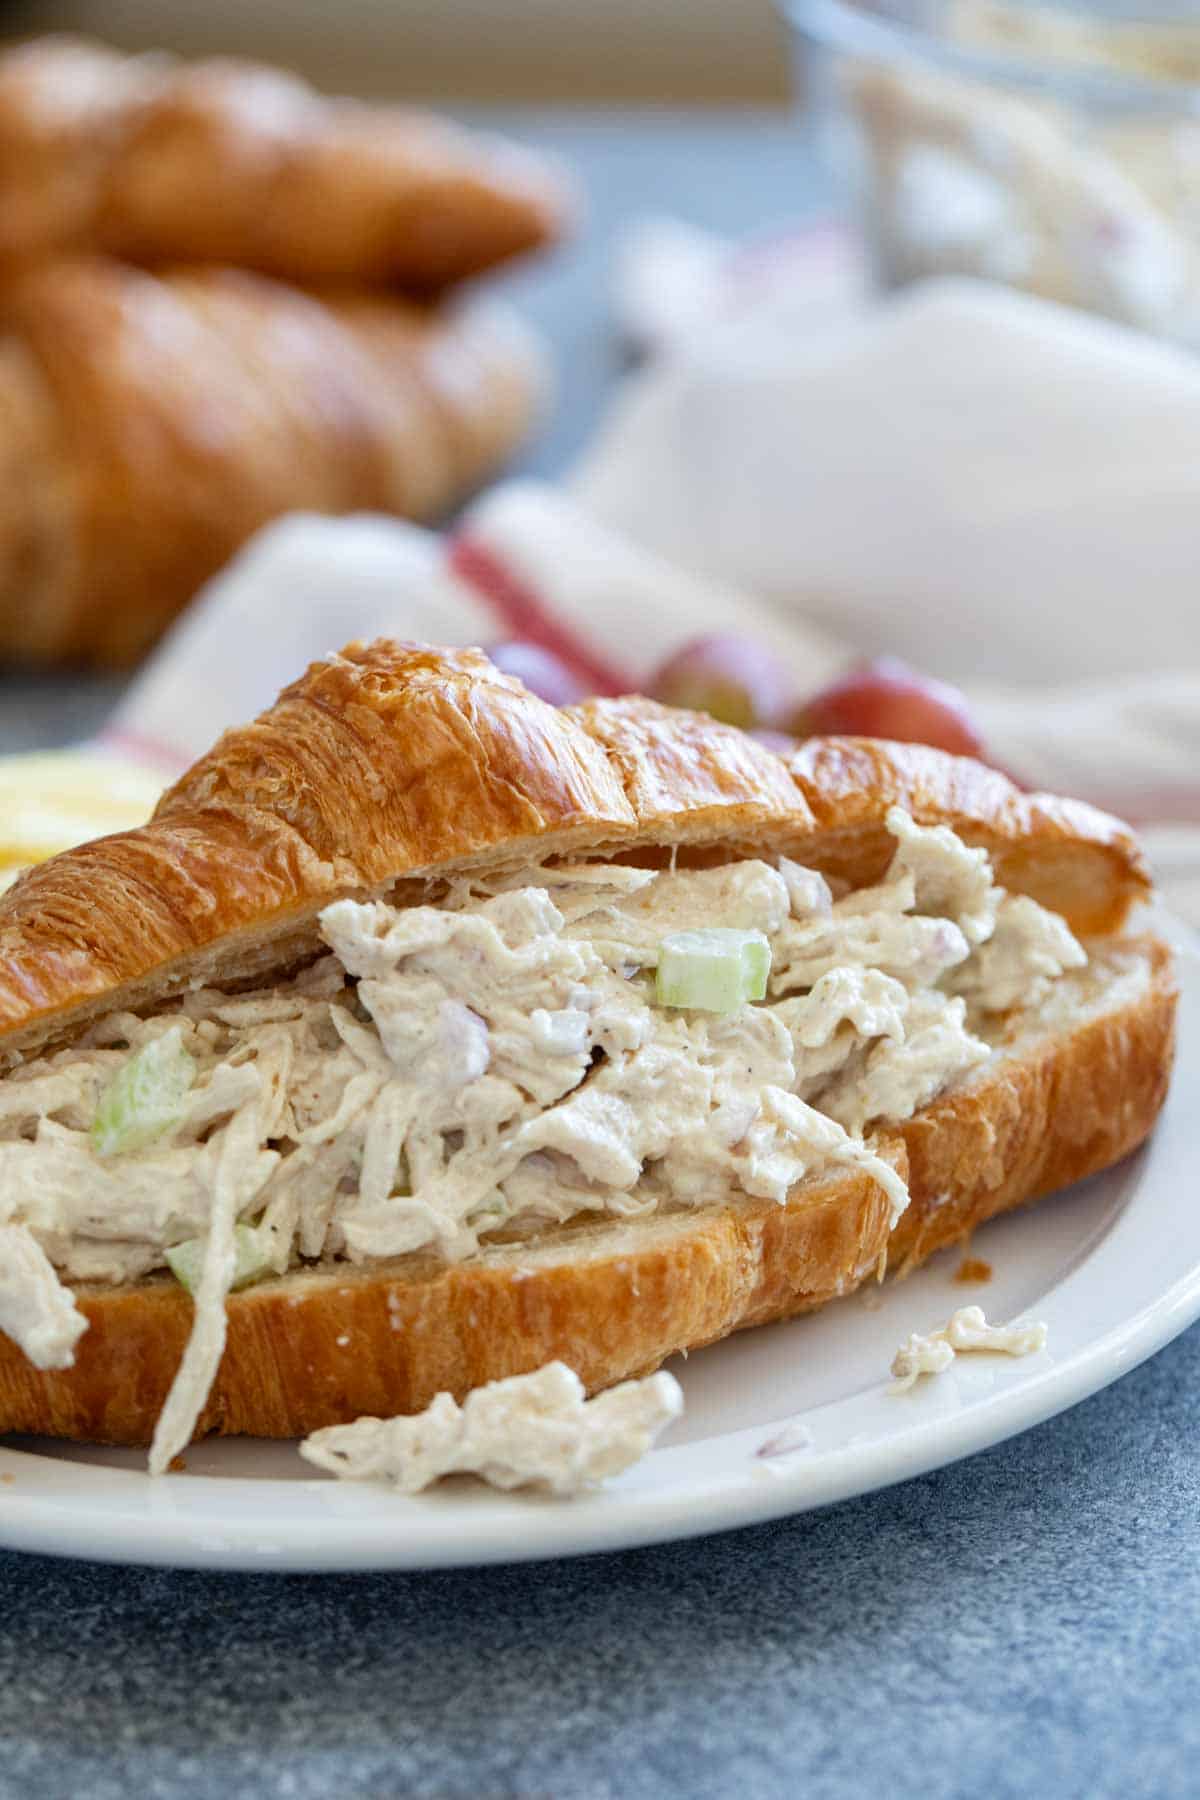 Classic chicken salad on a croissant.